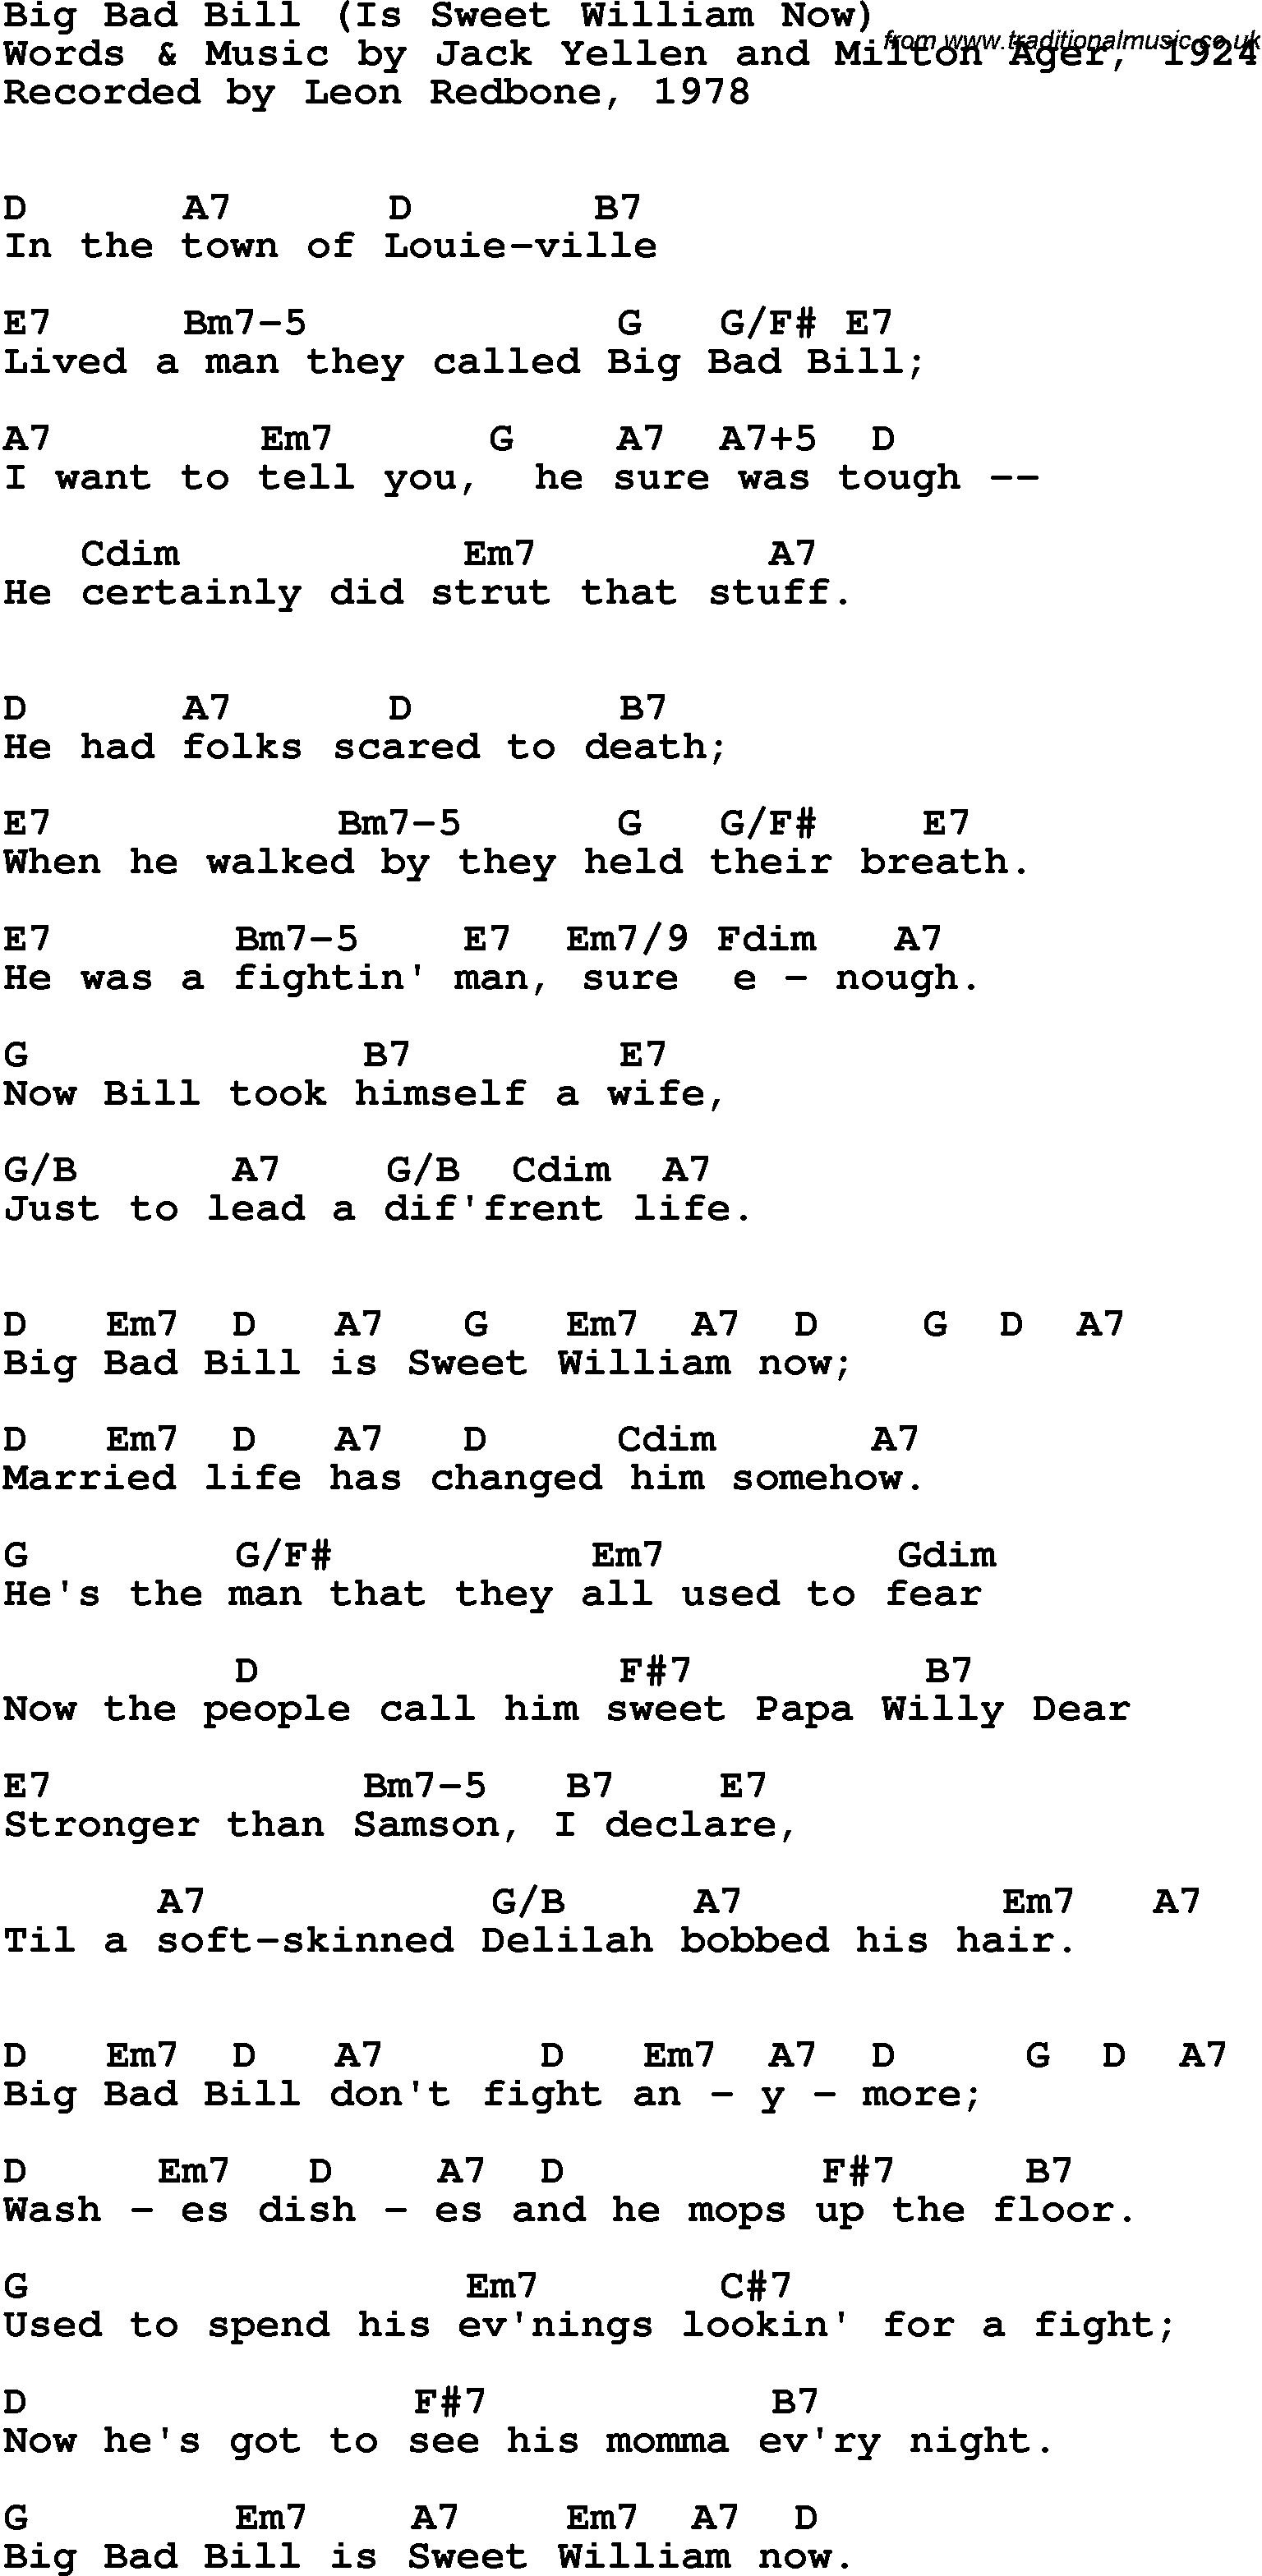 Song Lyrics with guitar chords for Big Bad Bill (Is Sweet William Now) - Leon Redbone, 1978